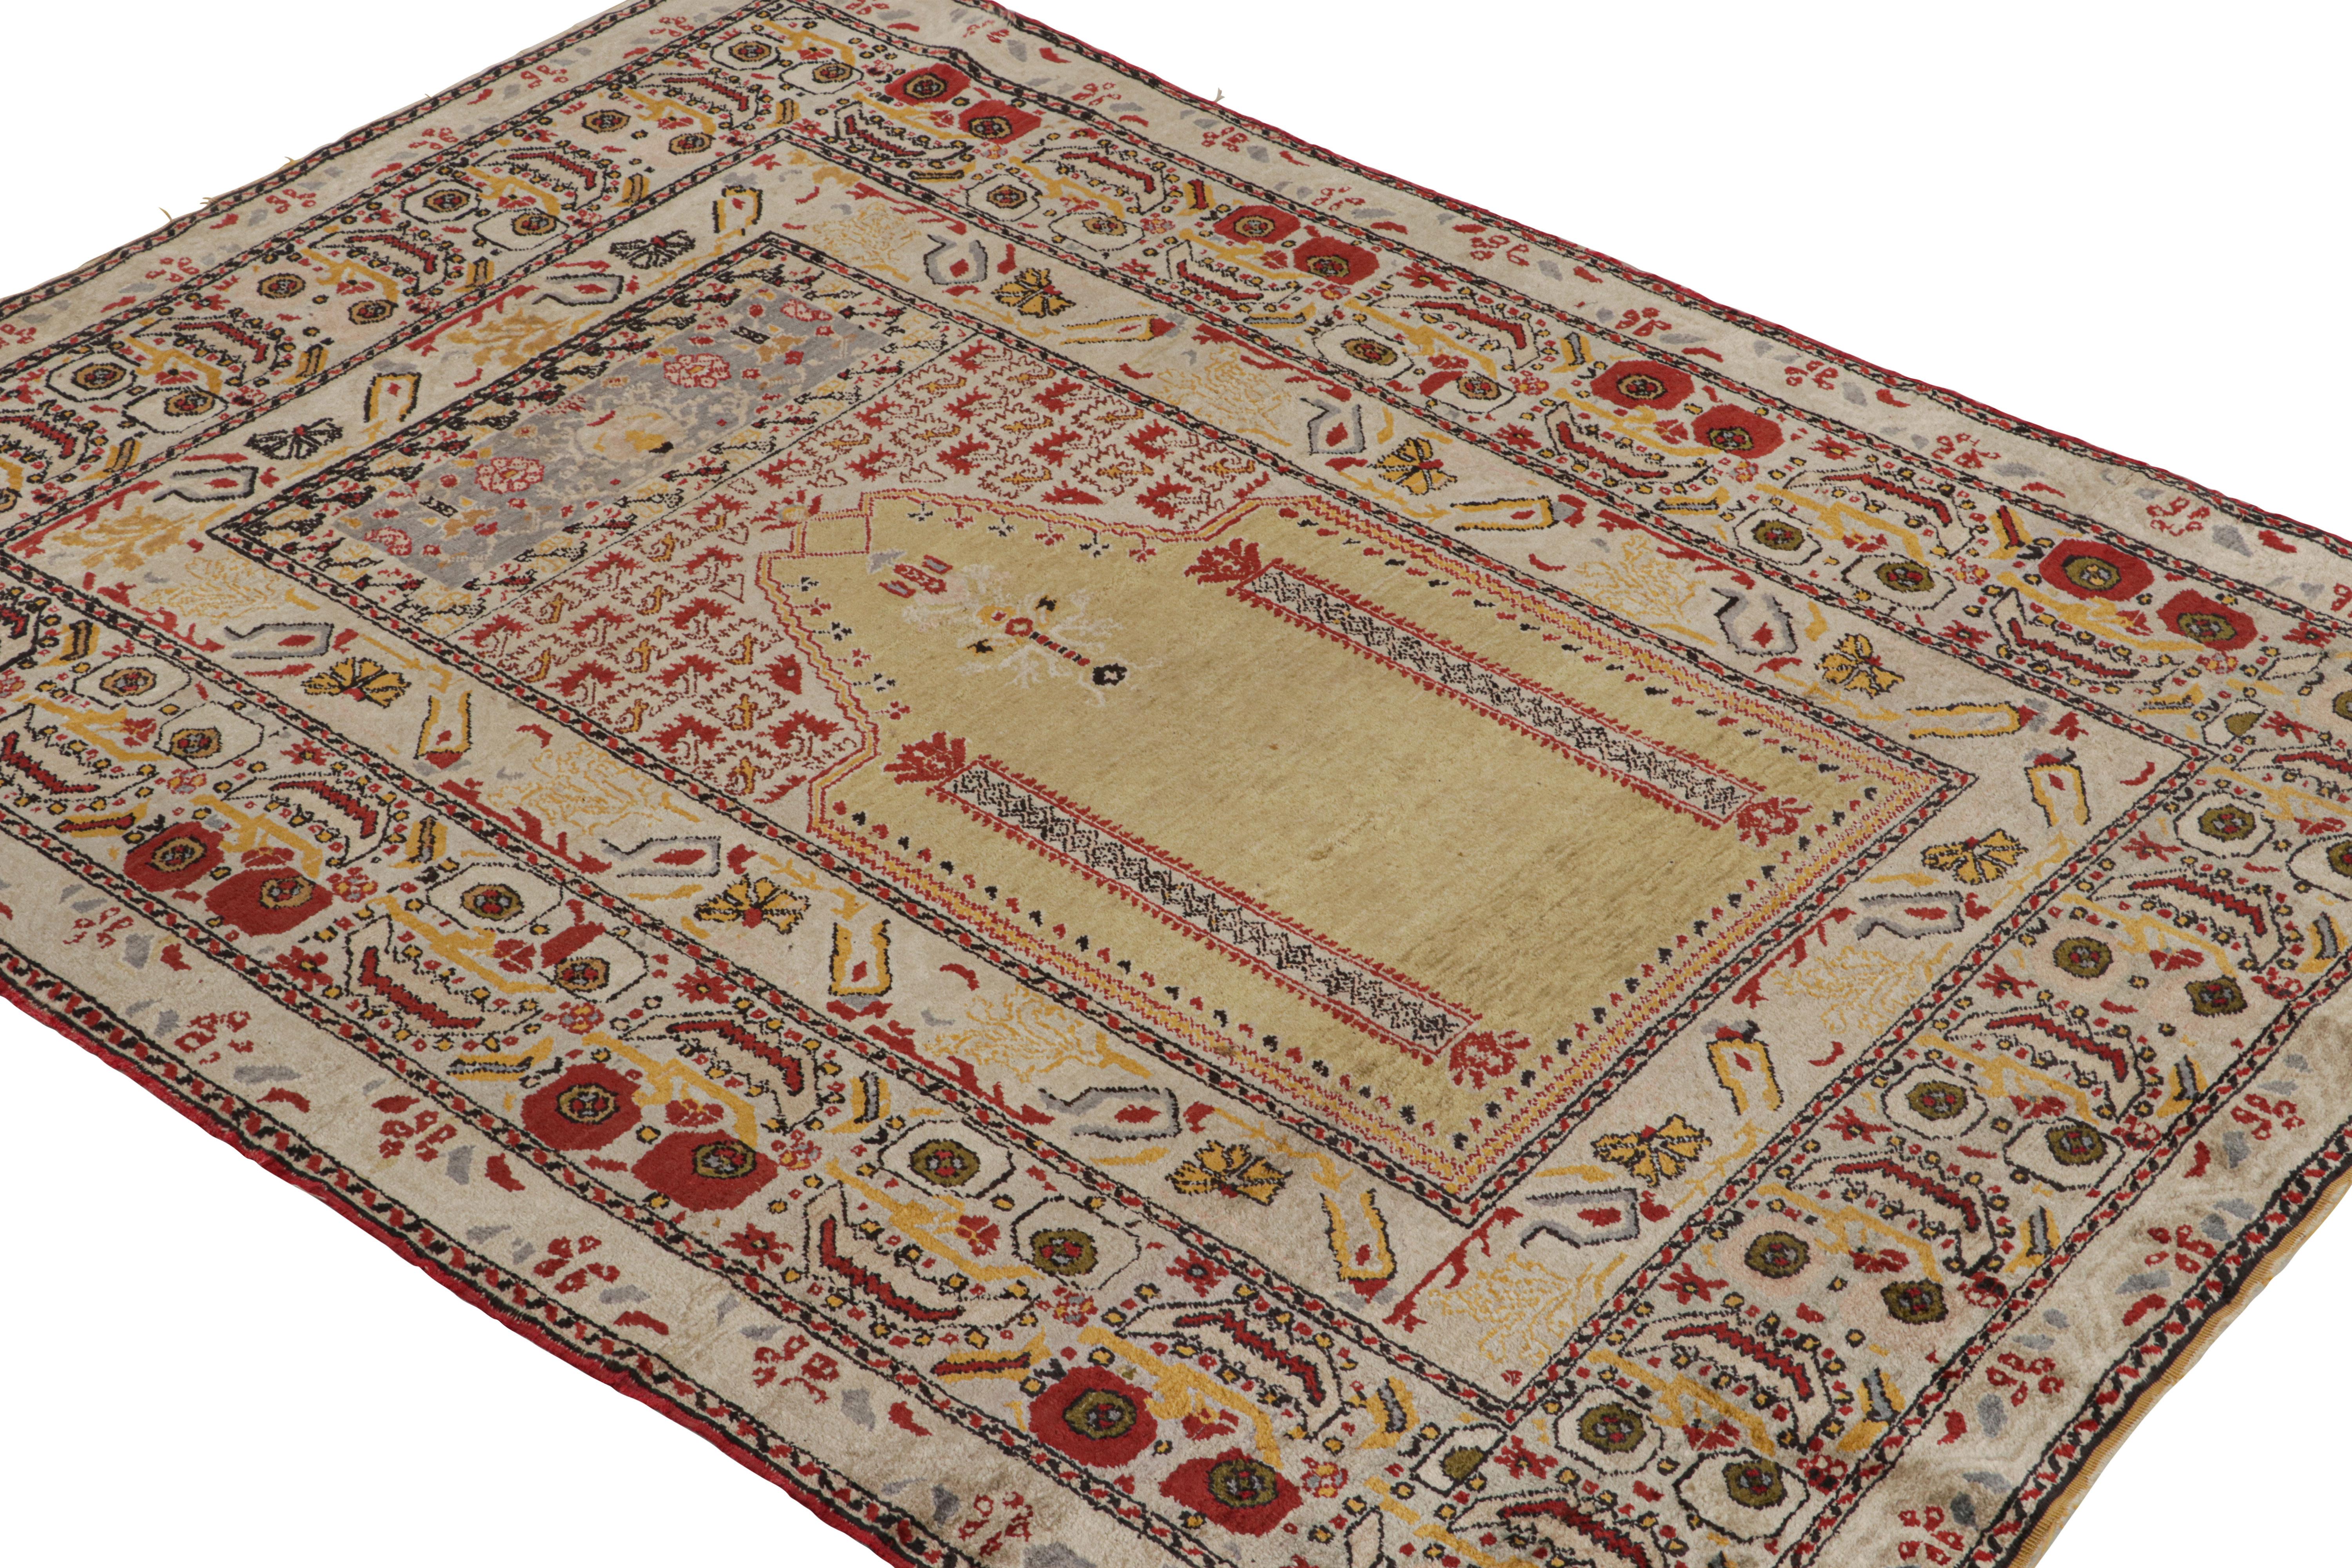 Hand-knotted in silk, this 4x5 Antique Turkish Mihrab rug in gold is a very special piece of rare construction and quality for this provenance.  

On the design: 

Connoisseurs will admire this piece featuring a regal design that arguably represents